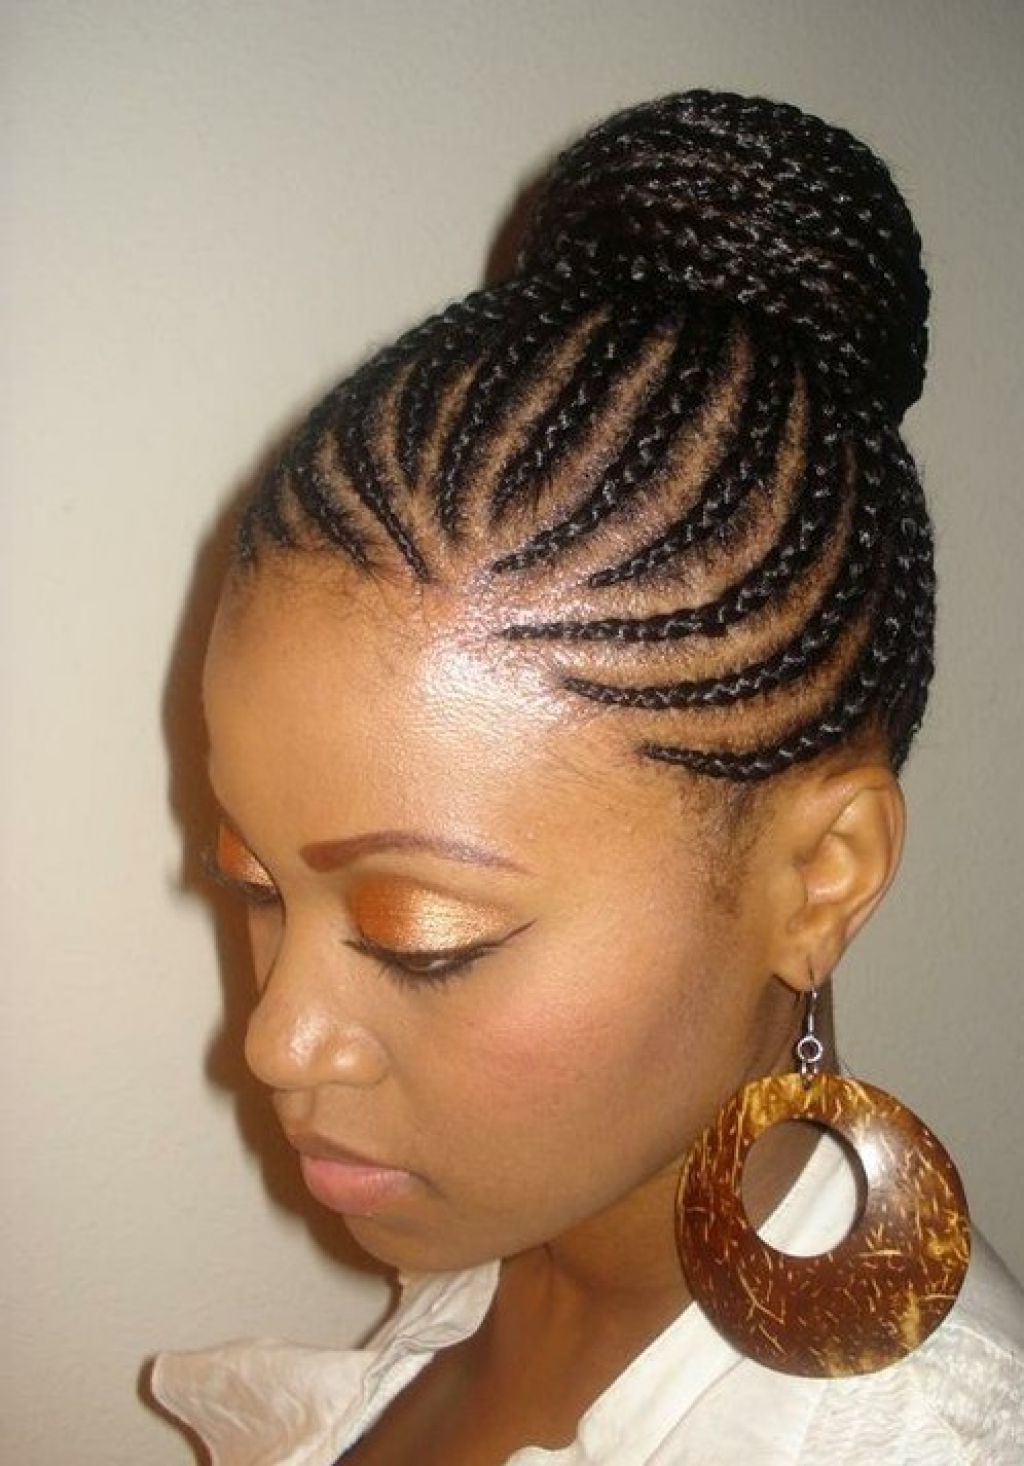 Awesome Hair Braided Bun Hairstyles Picture Of Black Styles And Updo Inside Black Braided Bun Updo Hairstyles (View 3 of 15)